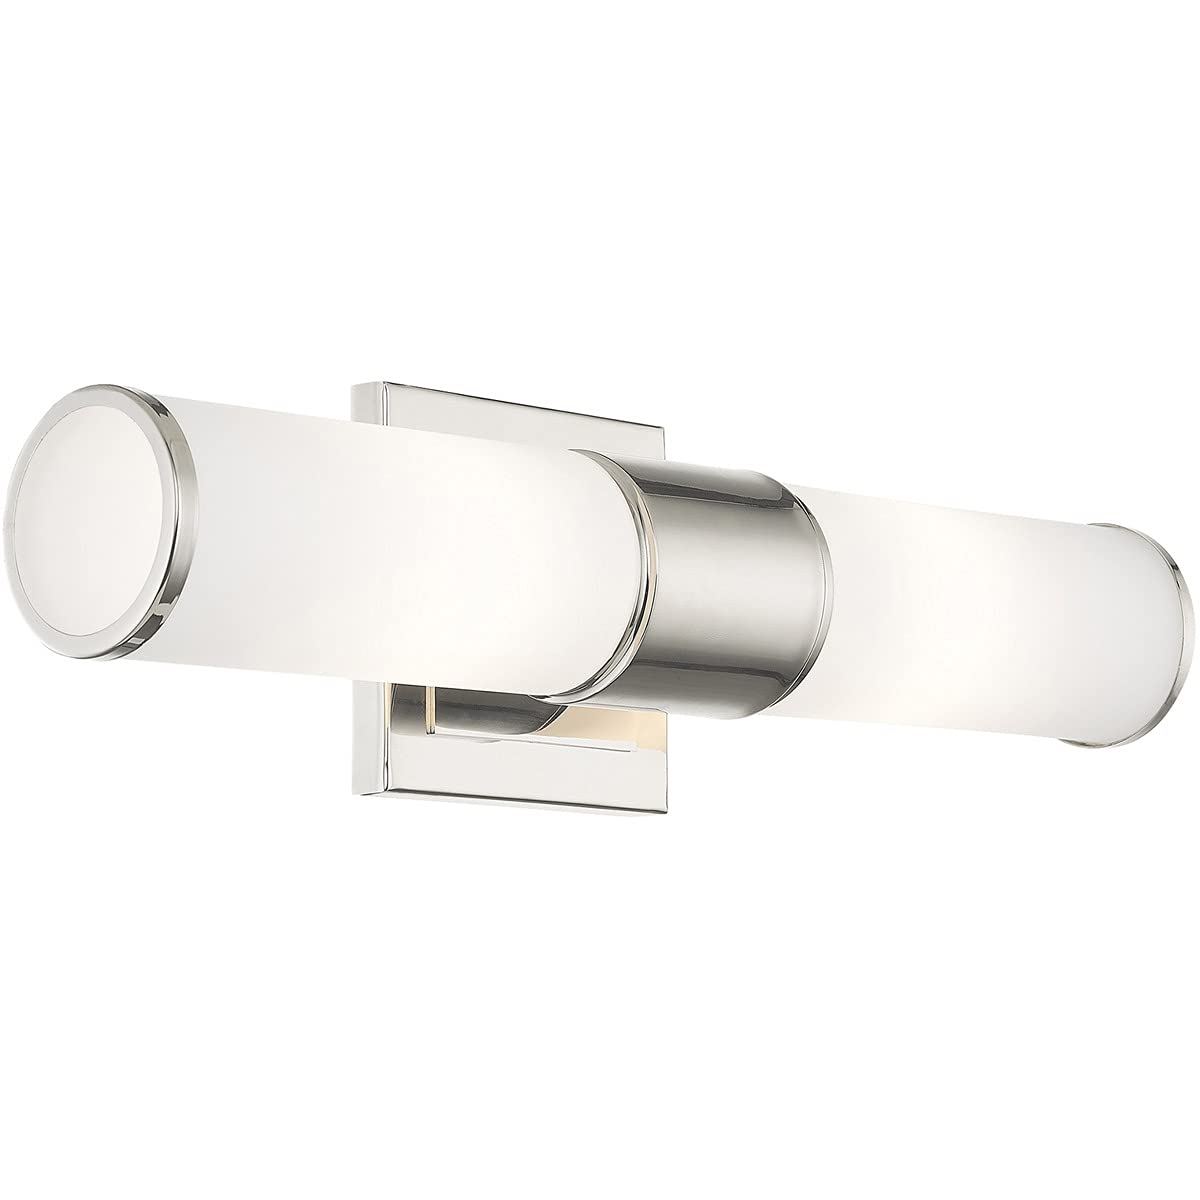 Livex 52122-35 Transitional Two Wall Sconce/Bath Light from Weston Collection in Polished Nickel Finish